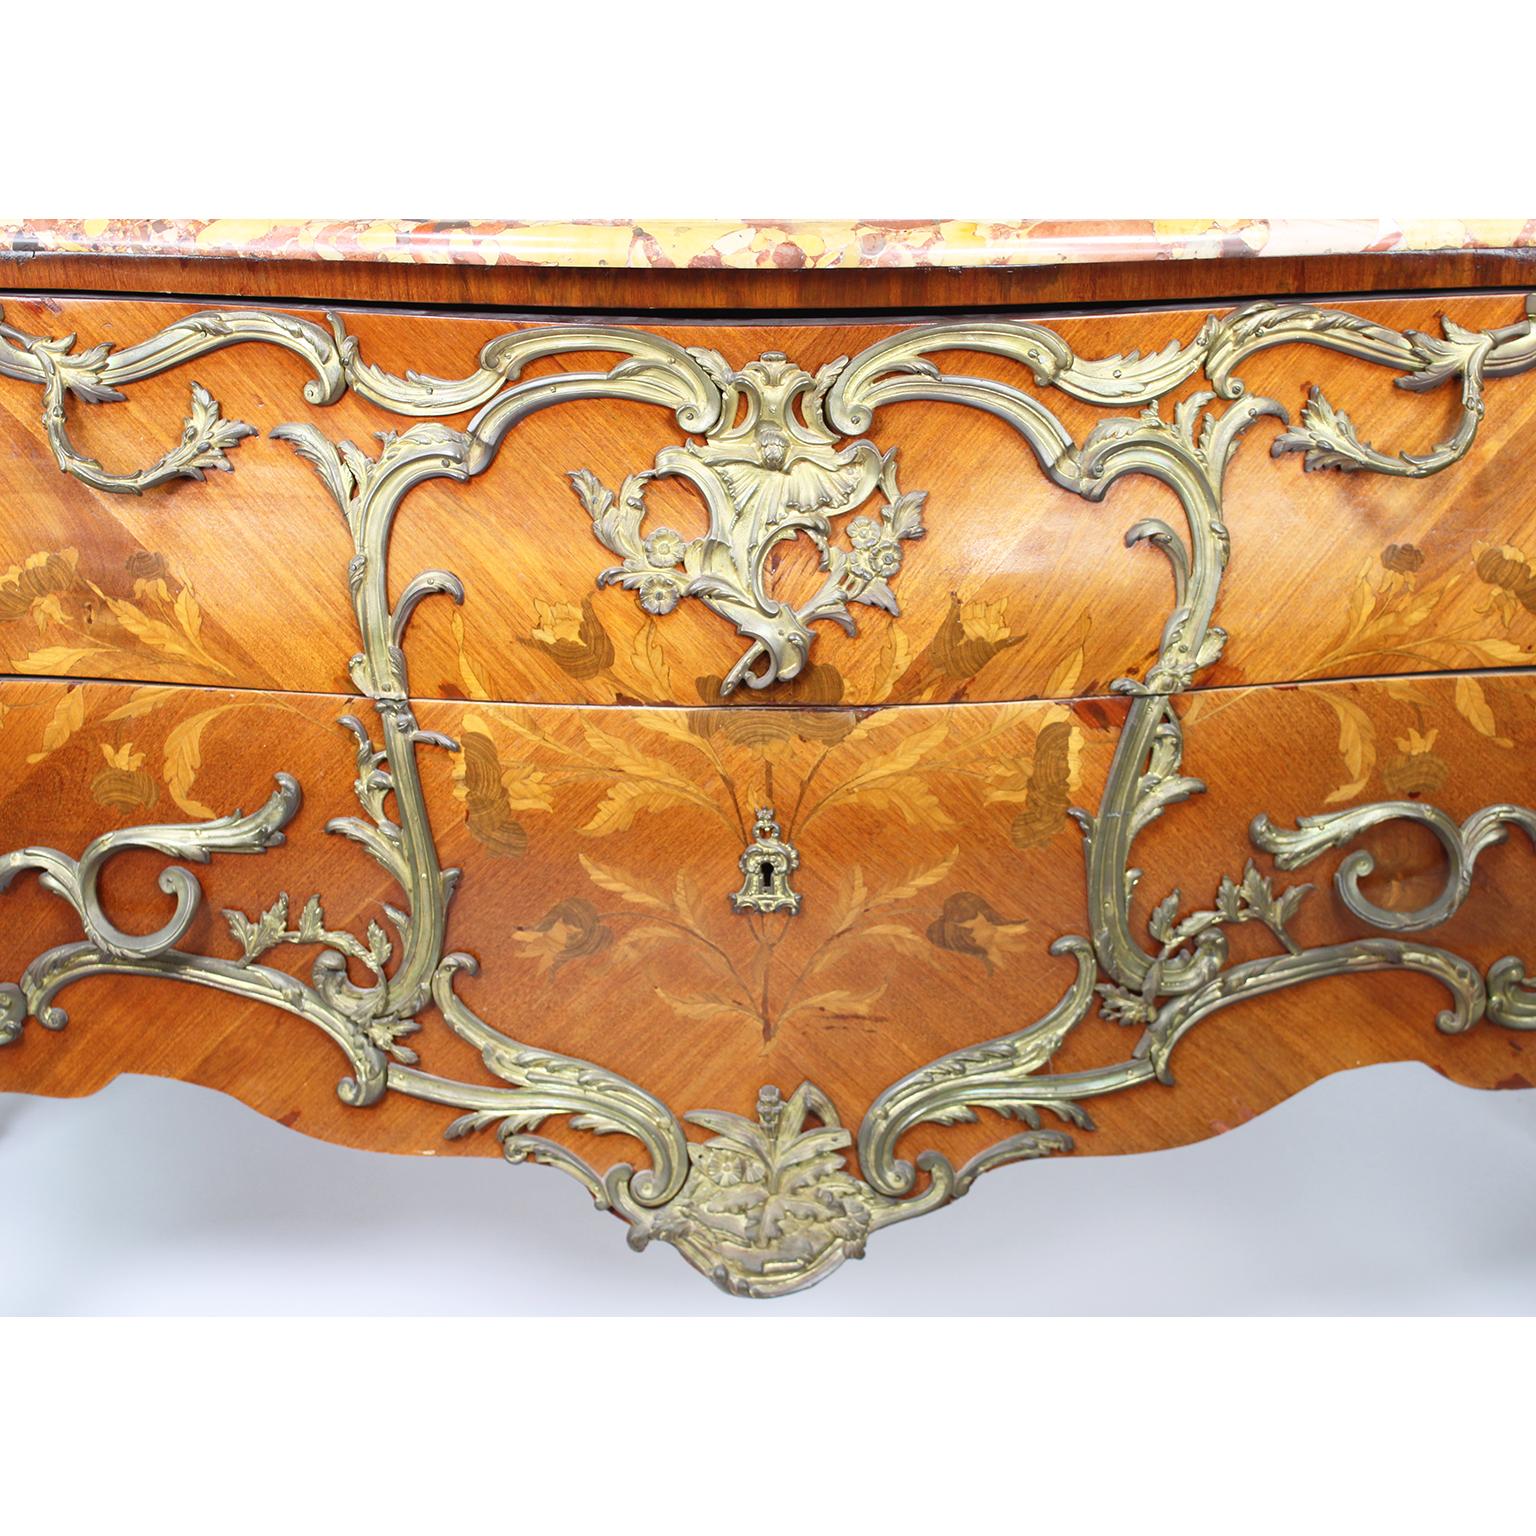 French 19th/20th Century Louis XV Style Gilt-Bronze Mounted Commode Marble Top In Fair Condition For Sale In Los Angeles, CA